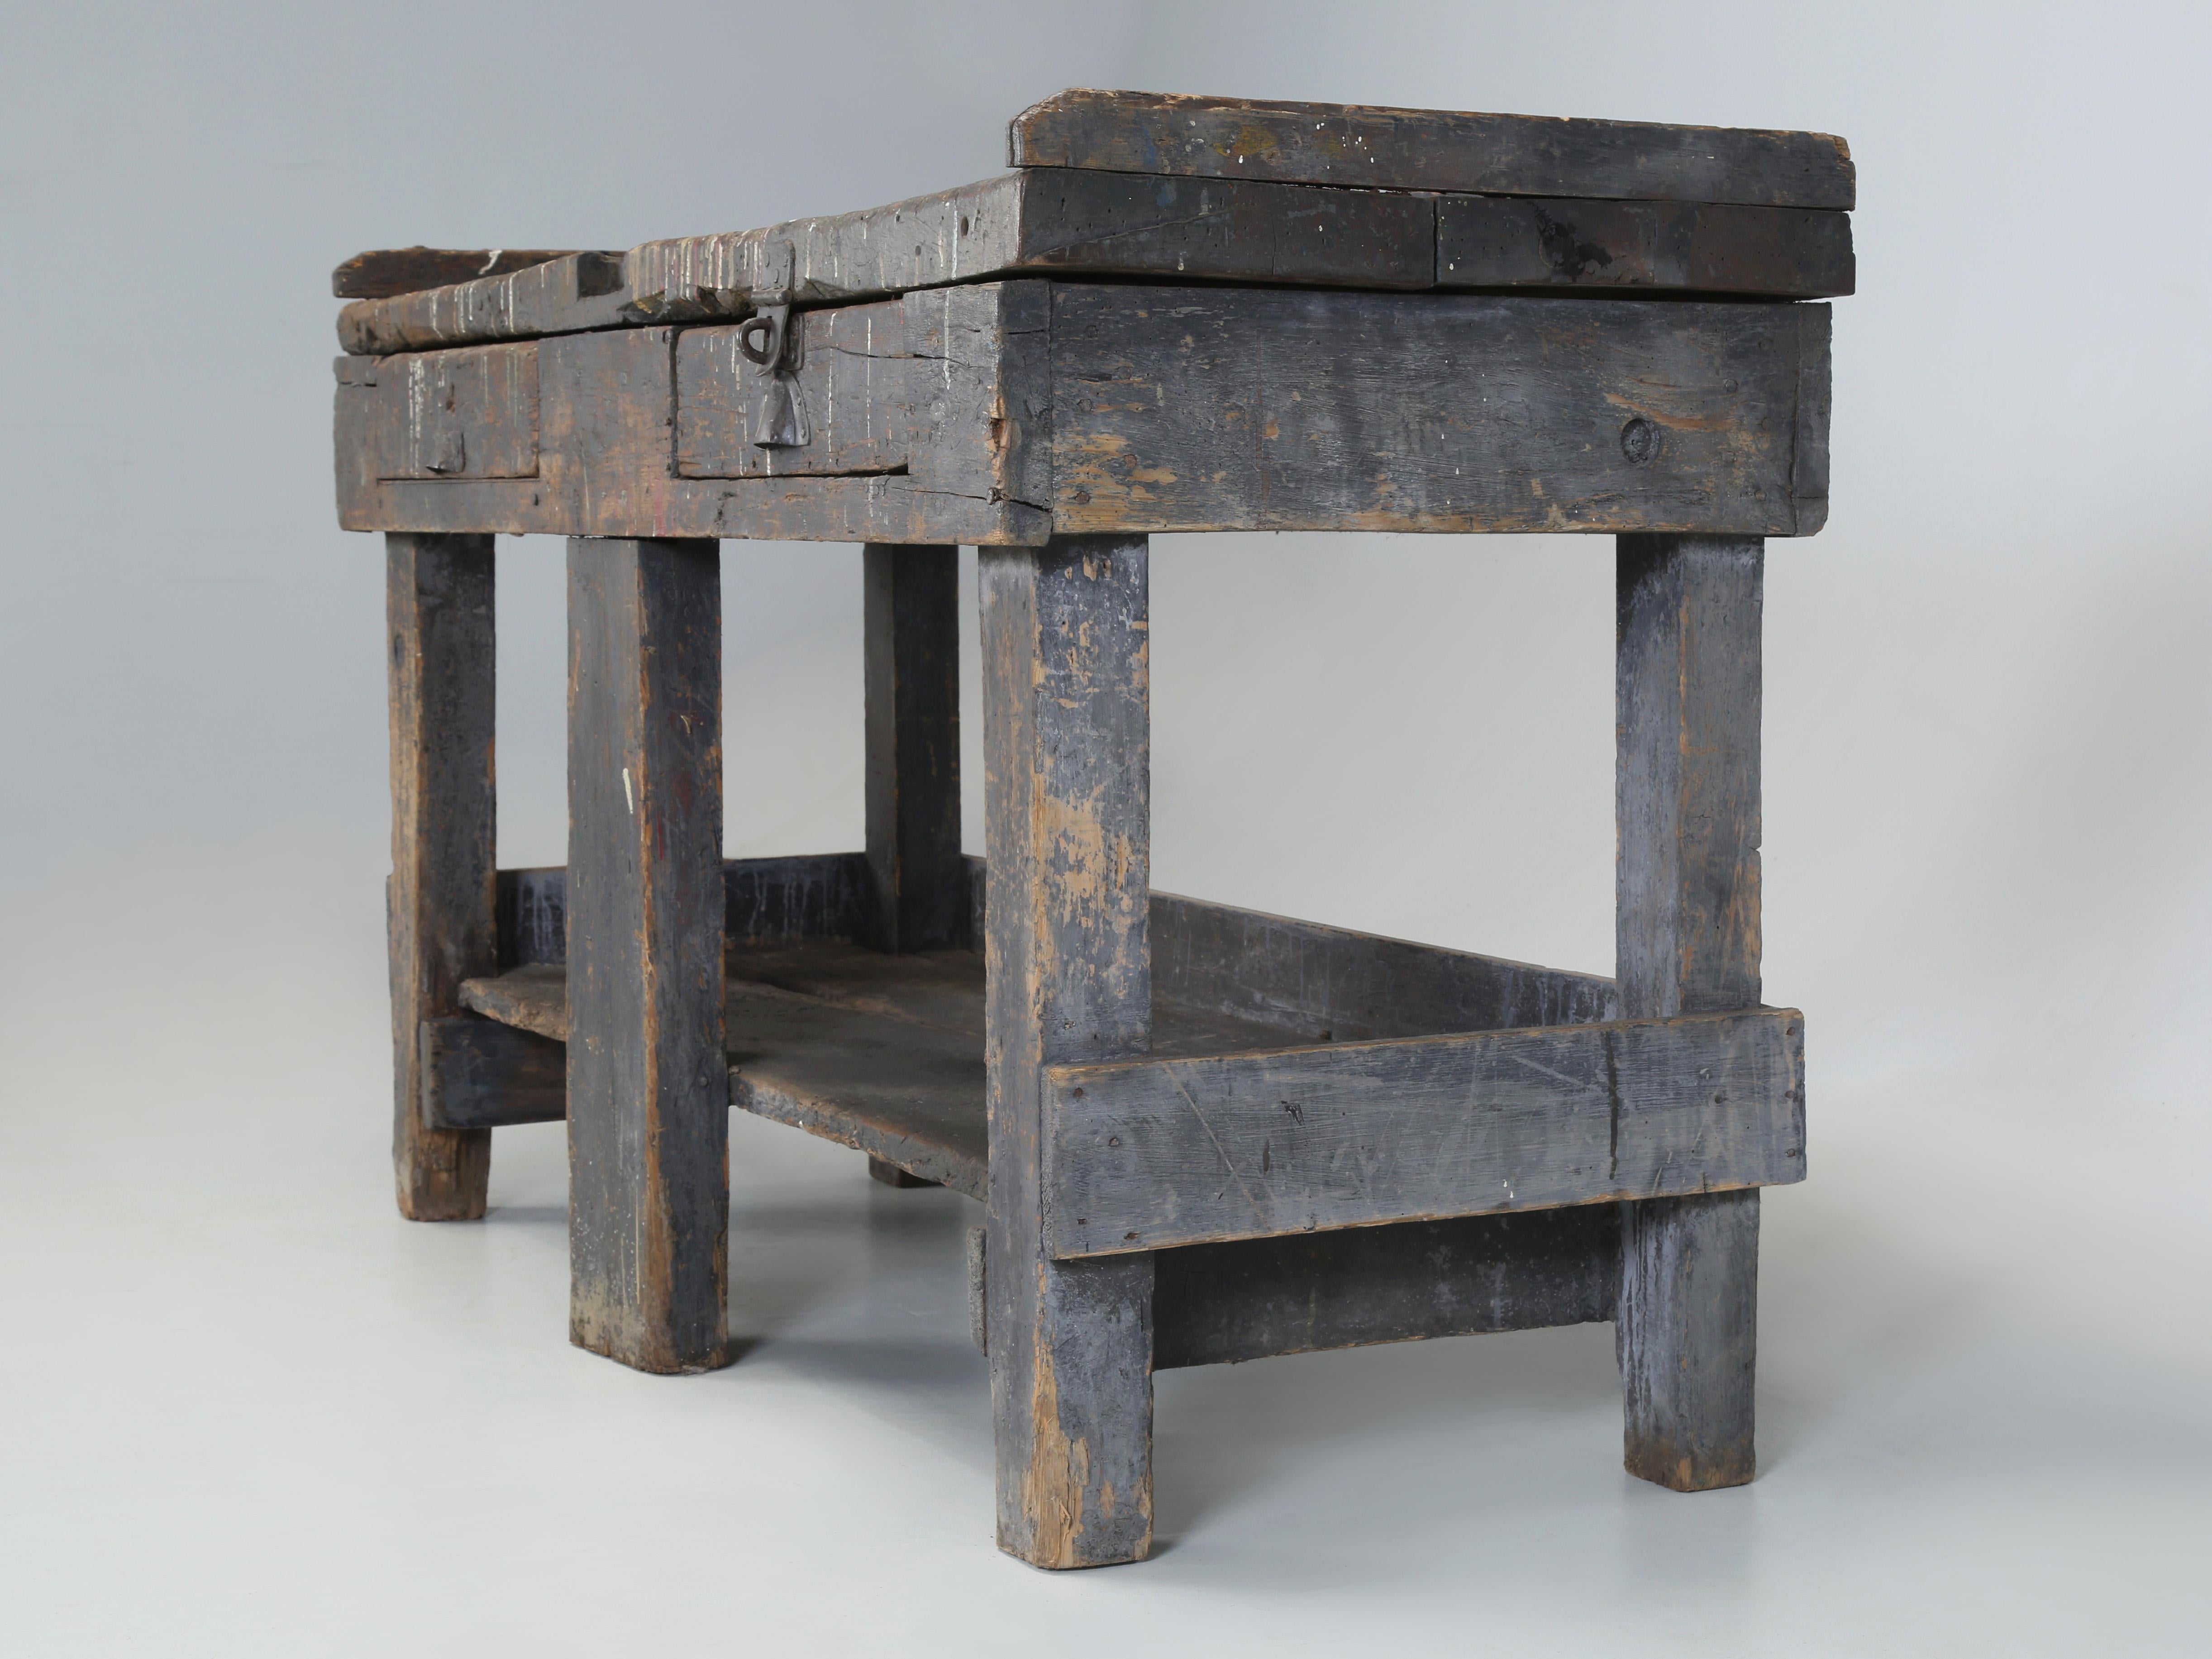 Wood Antique Country Swedish Work Bench in Old Paint and Structurally Sound c1800's For Sale